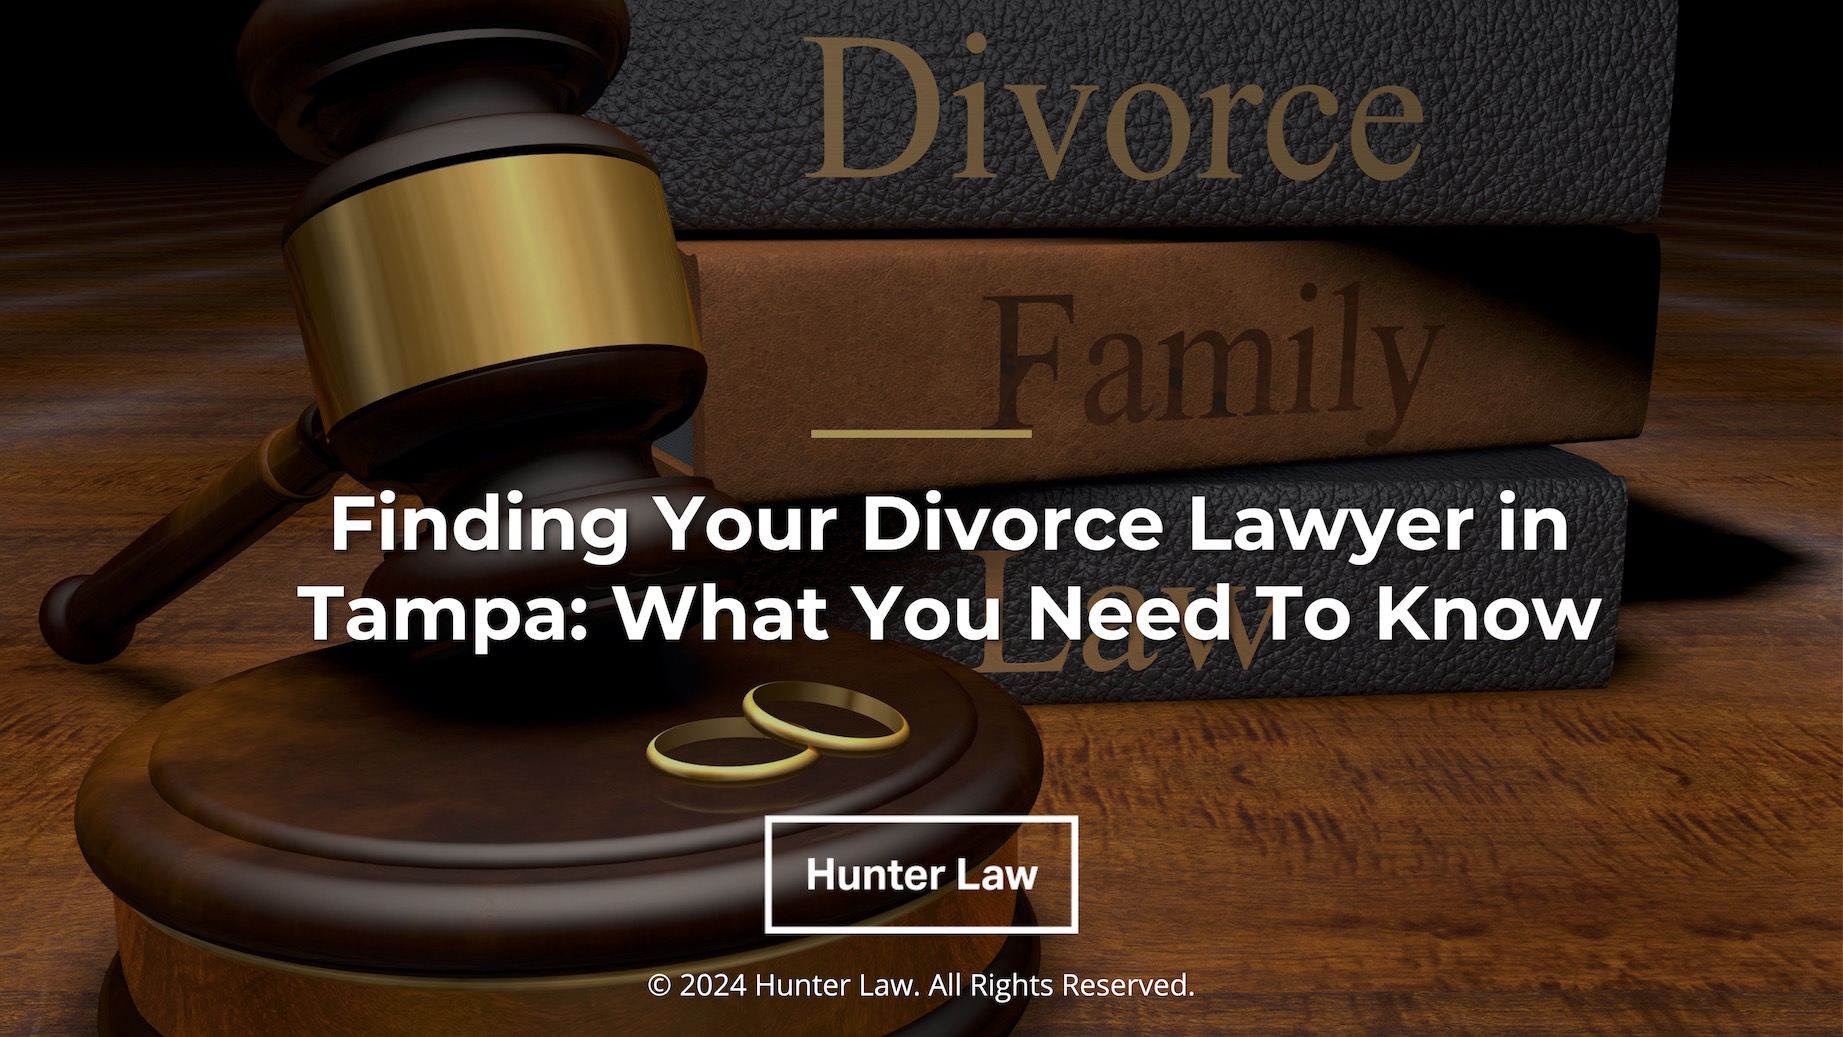 Featured: Divorce, Family Law books on desk with judges gavel- Finding your divorce lawyer in Tampa: What You need to know